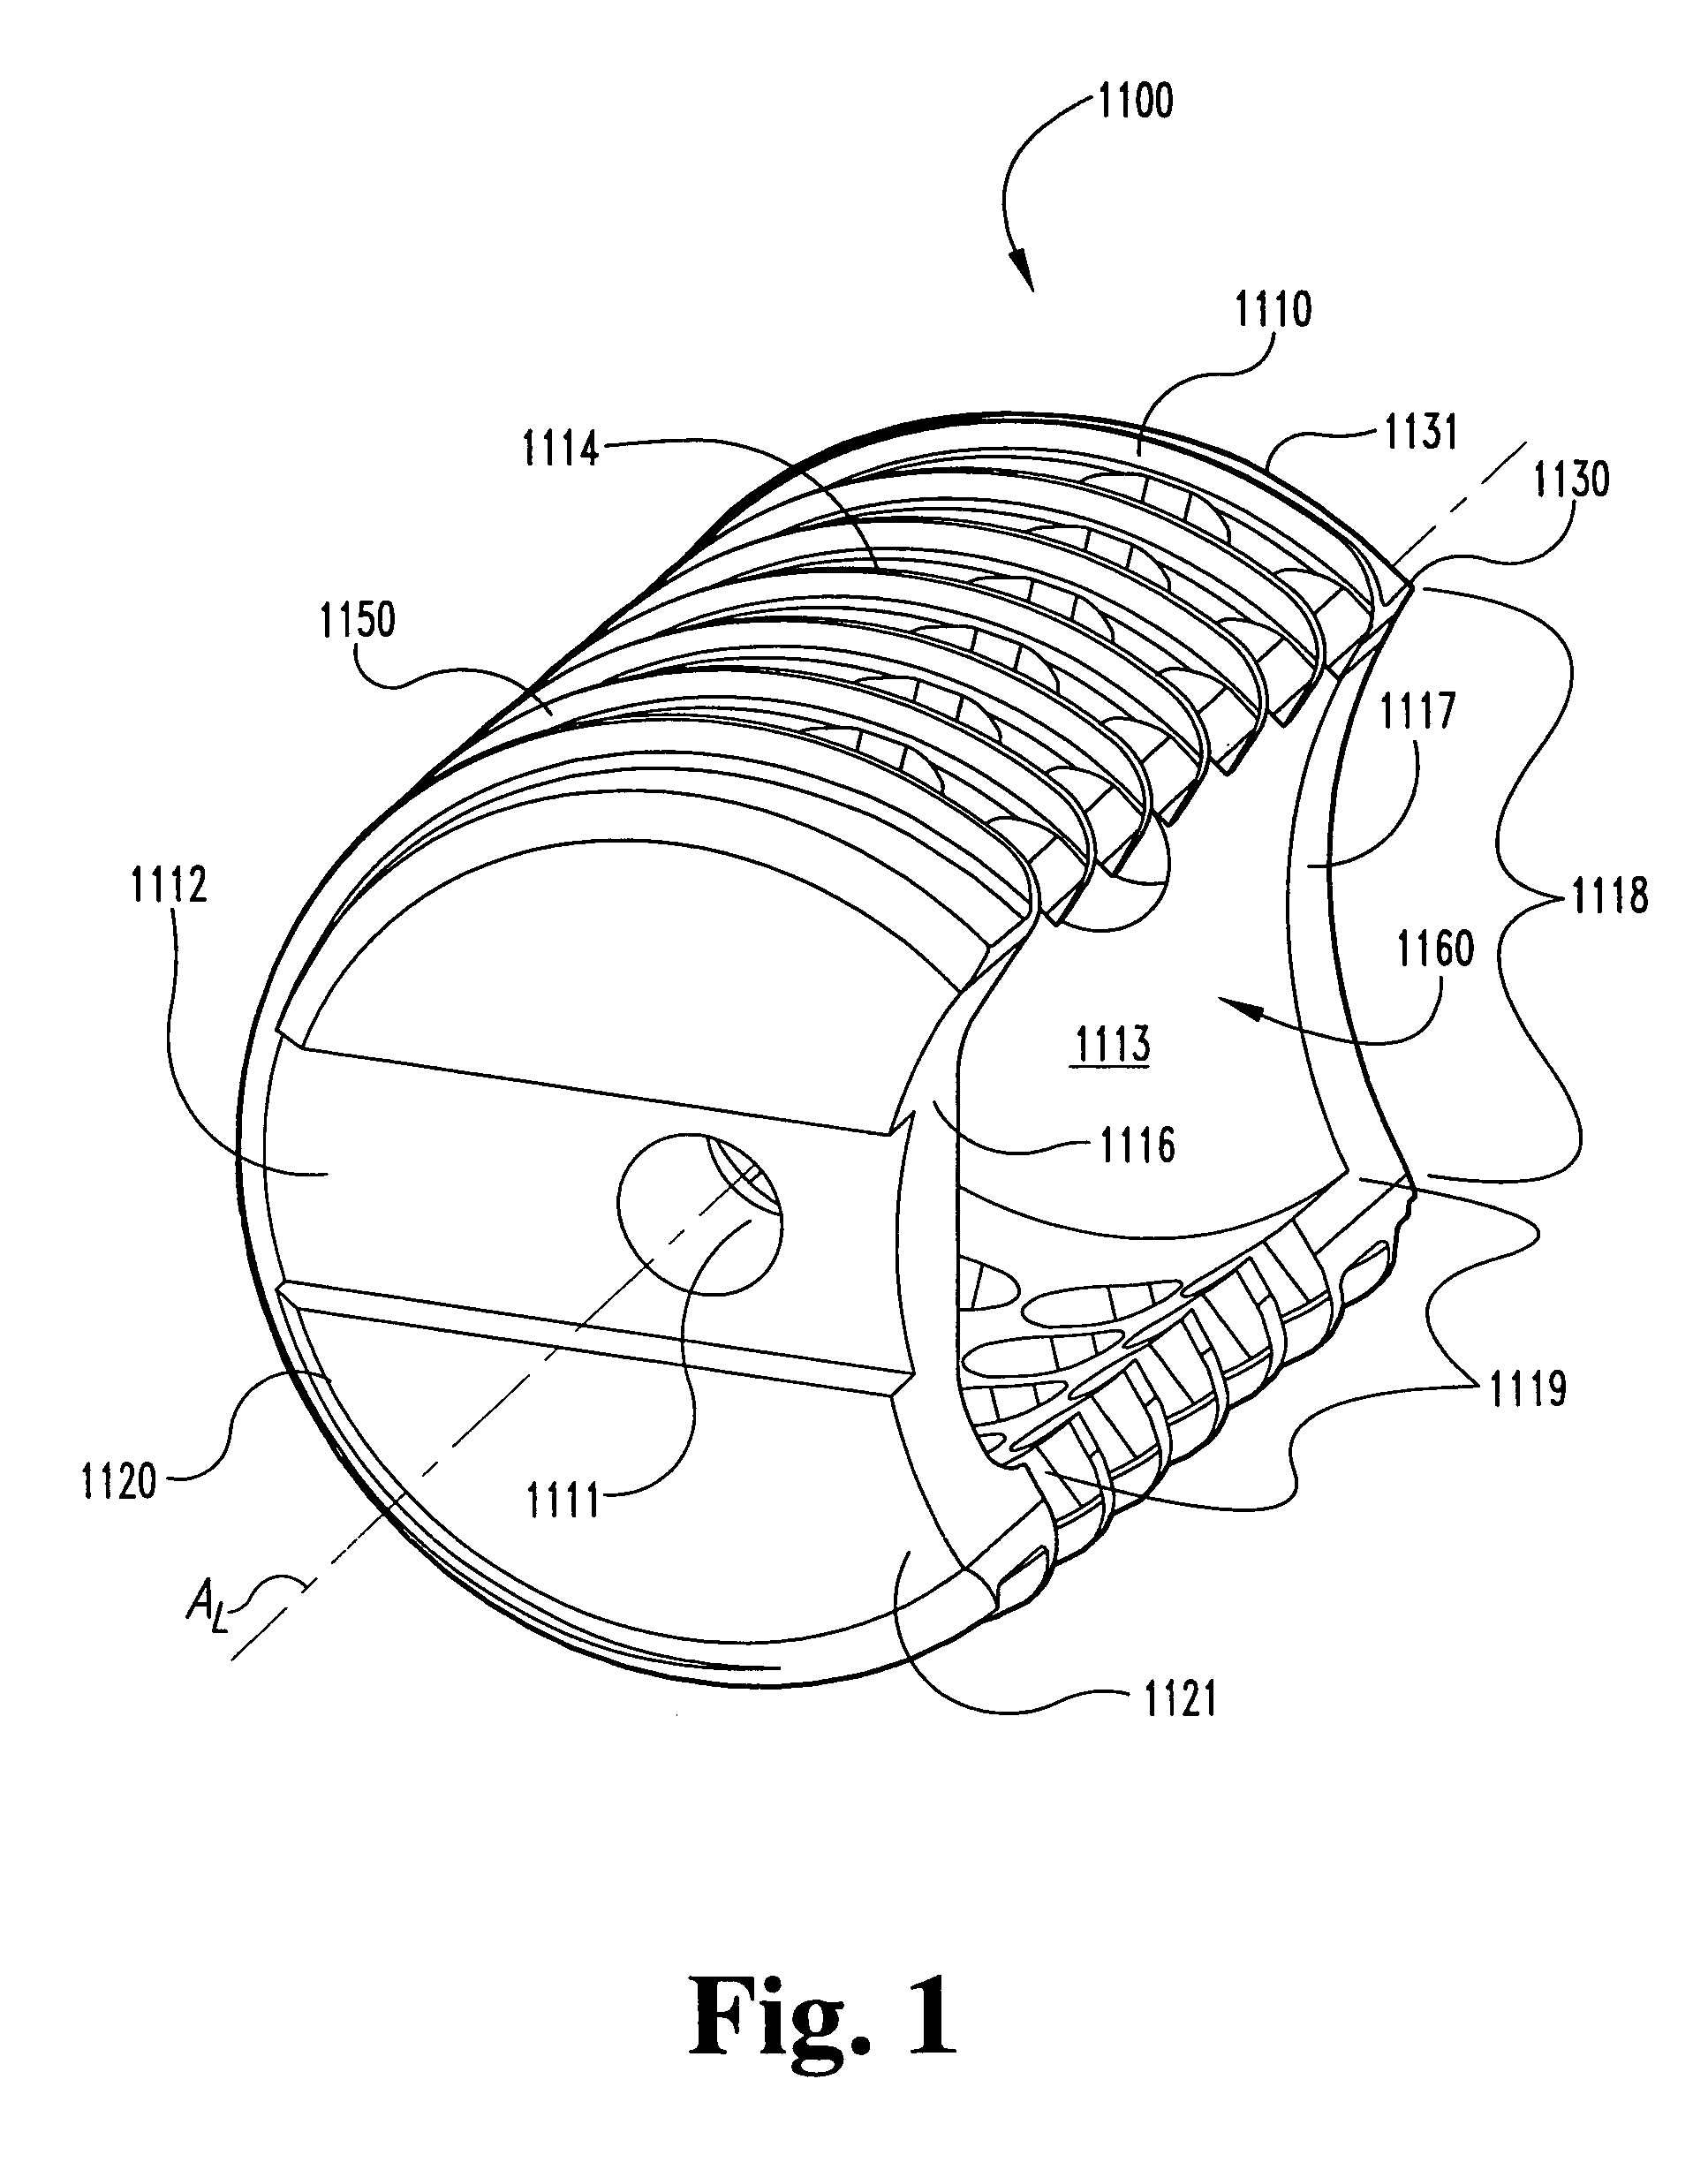 Intervertebral spacers with side wall accessible interior cavity